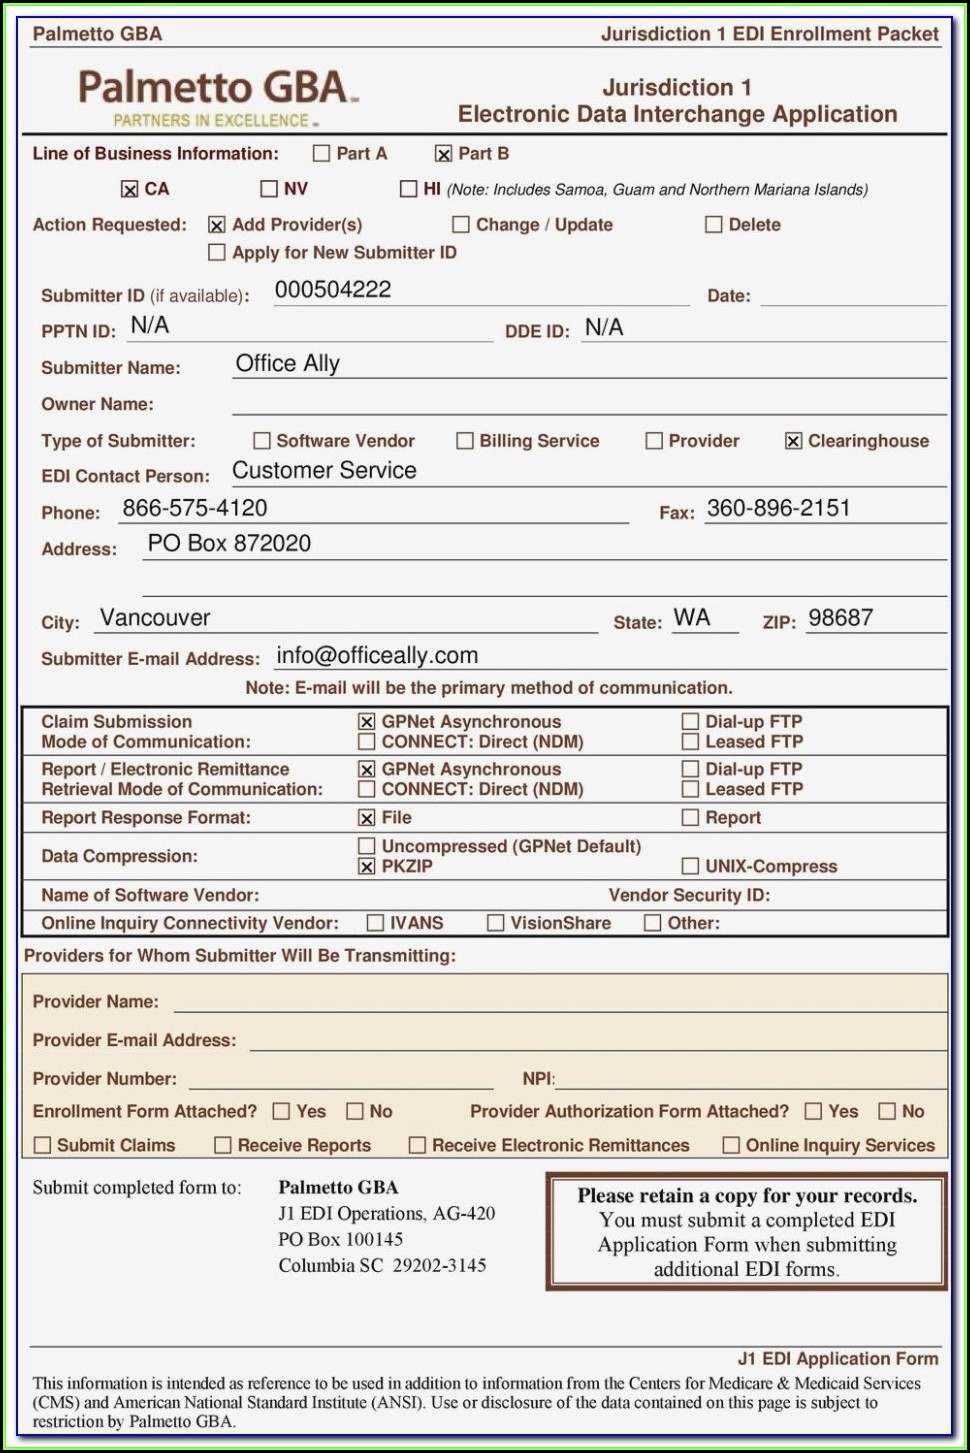 medicare-claim-form-1490s-form-resume-examples-a6ynz58ybg